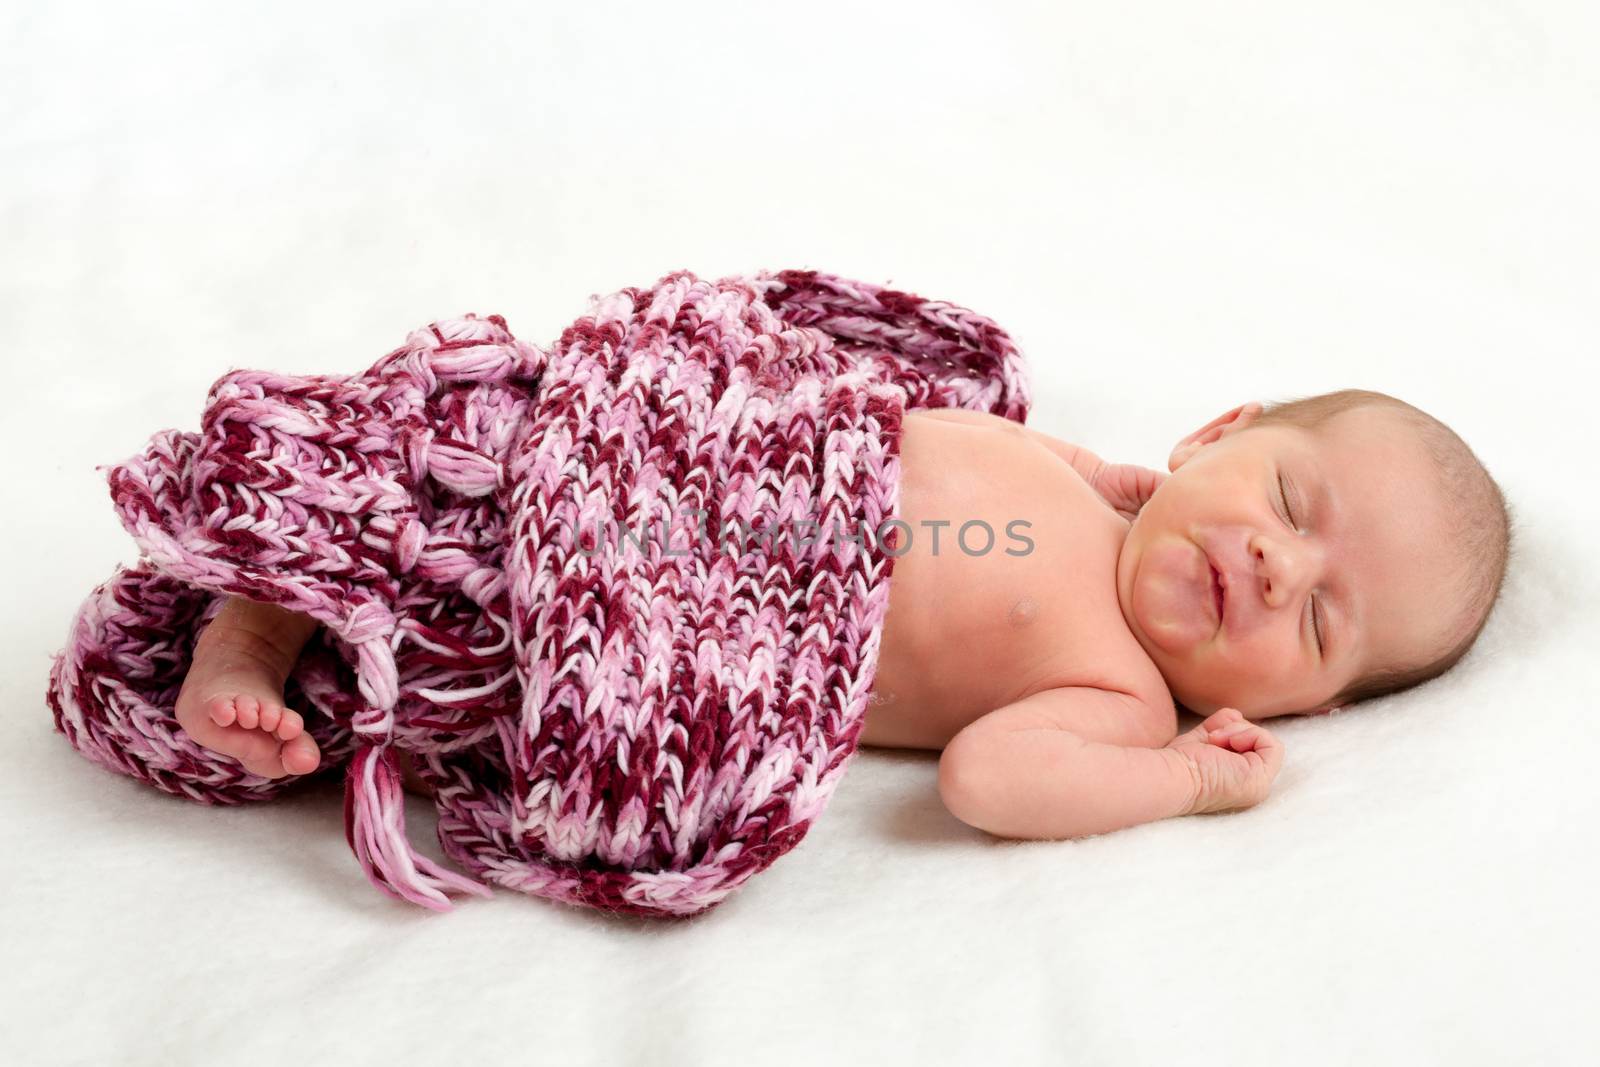 sleeping newborn baby in shawl on white blanket - the first week of the new life